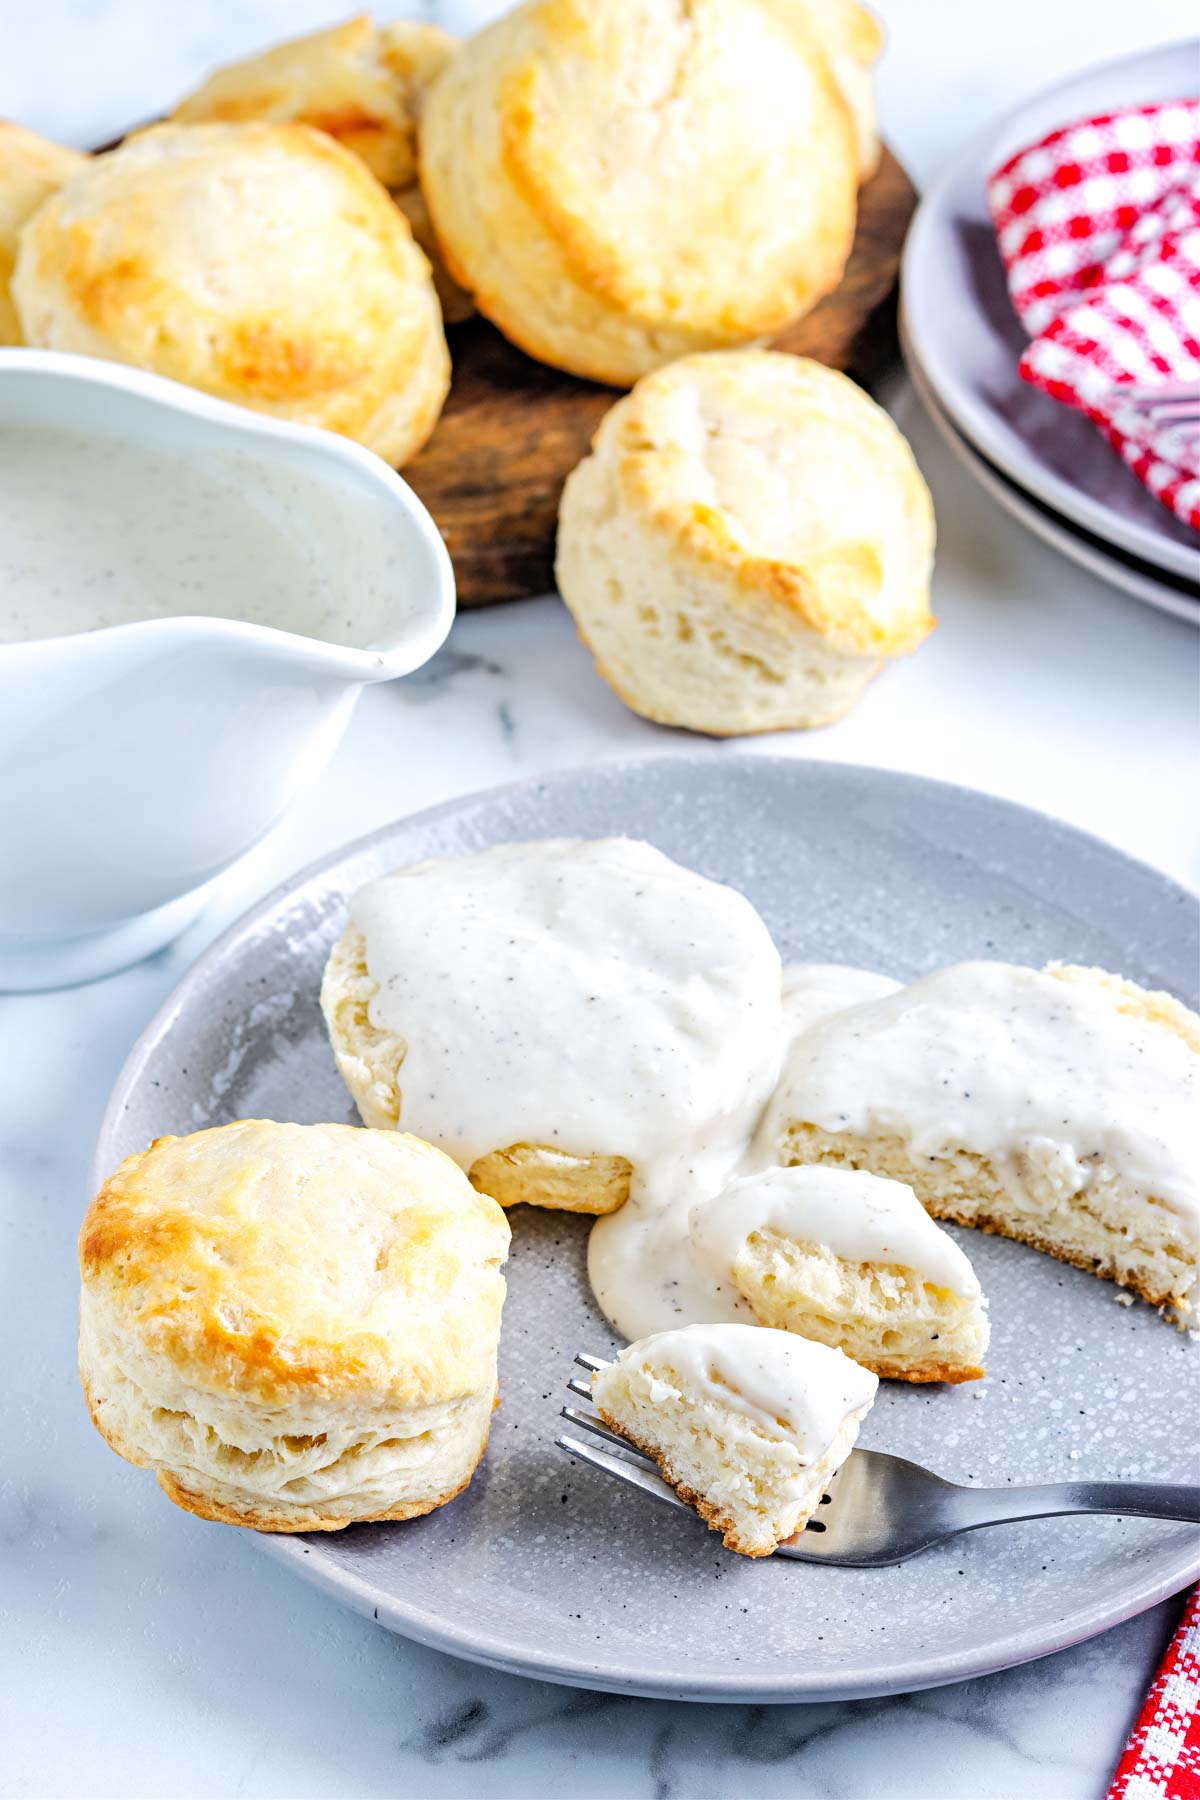 The finished White Gravy poured over biscuits.